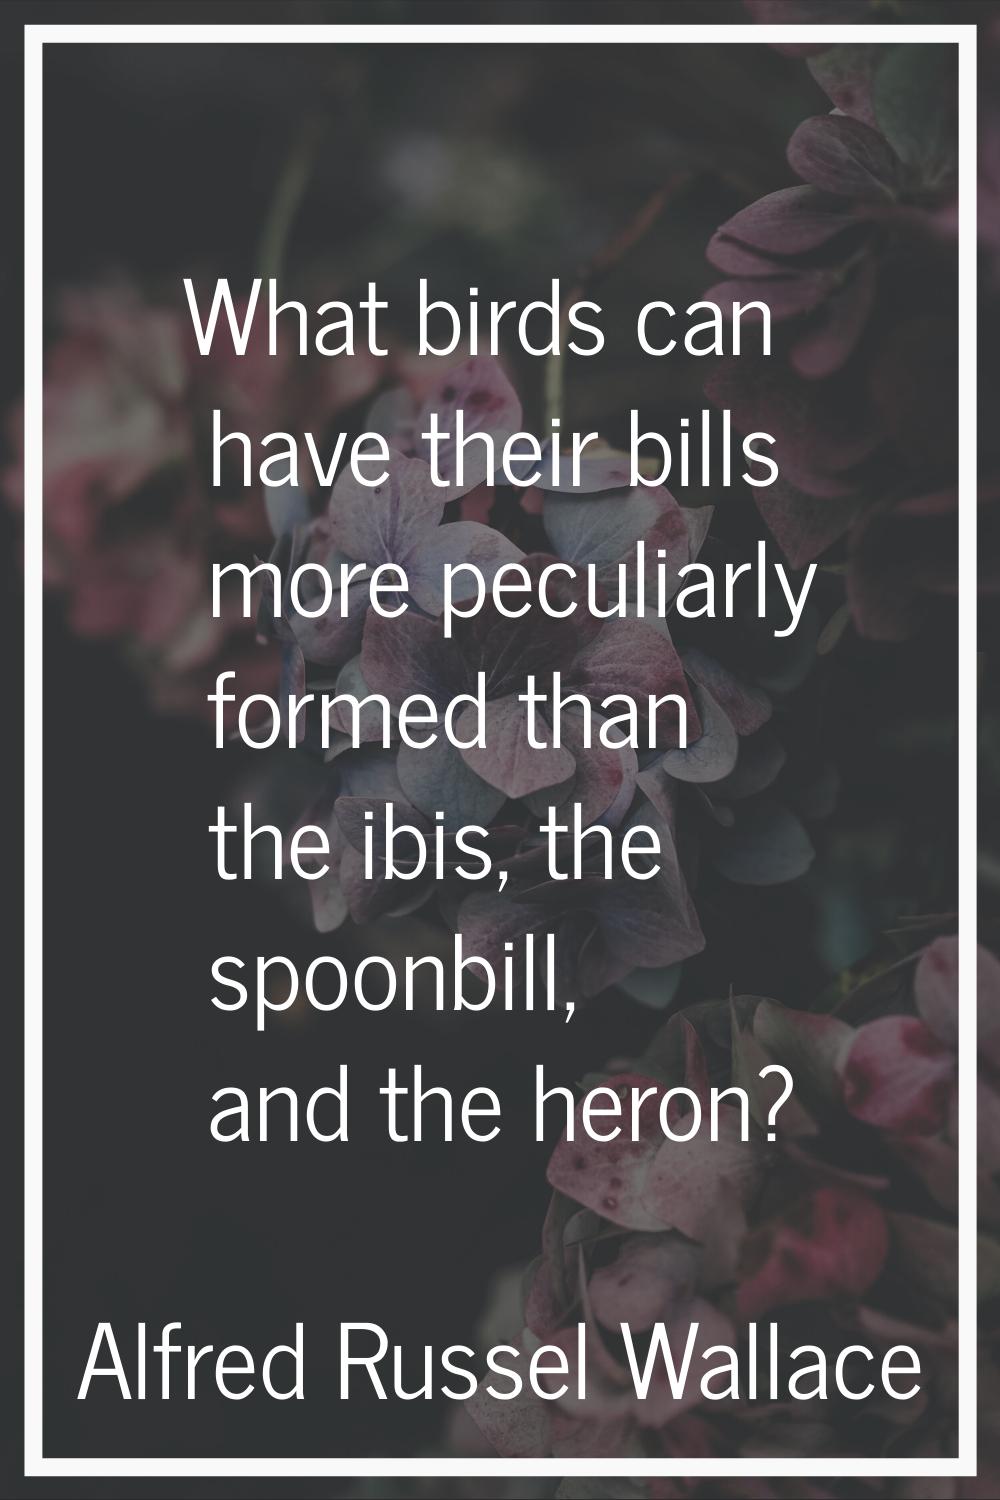 What birds can have their bills more peculiarly formed than the ibis, the spoonbill, and the heron?